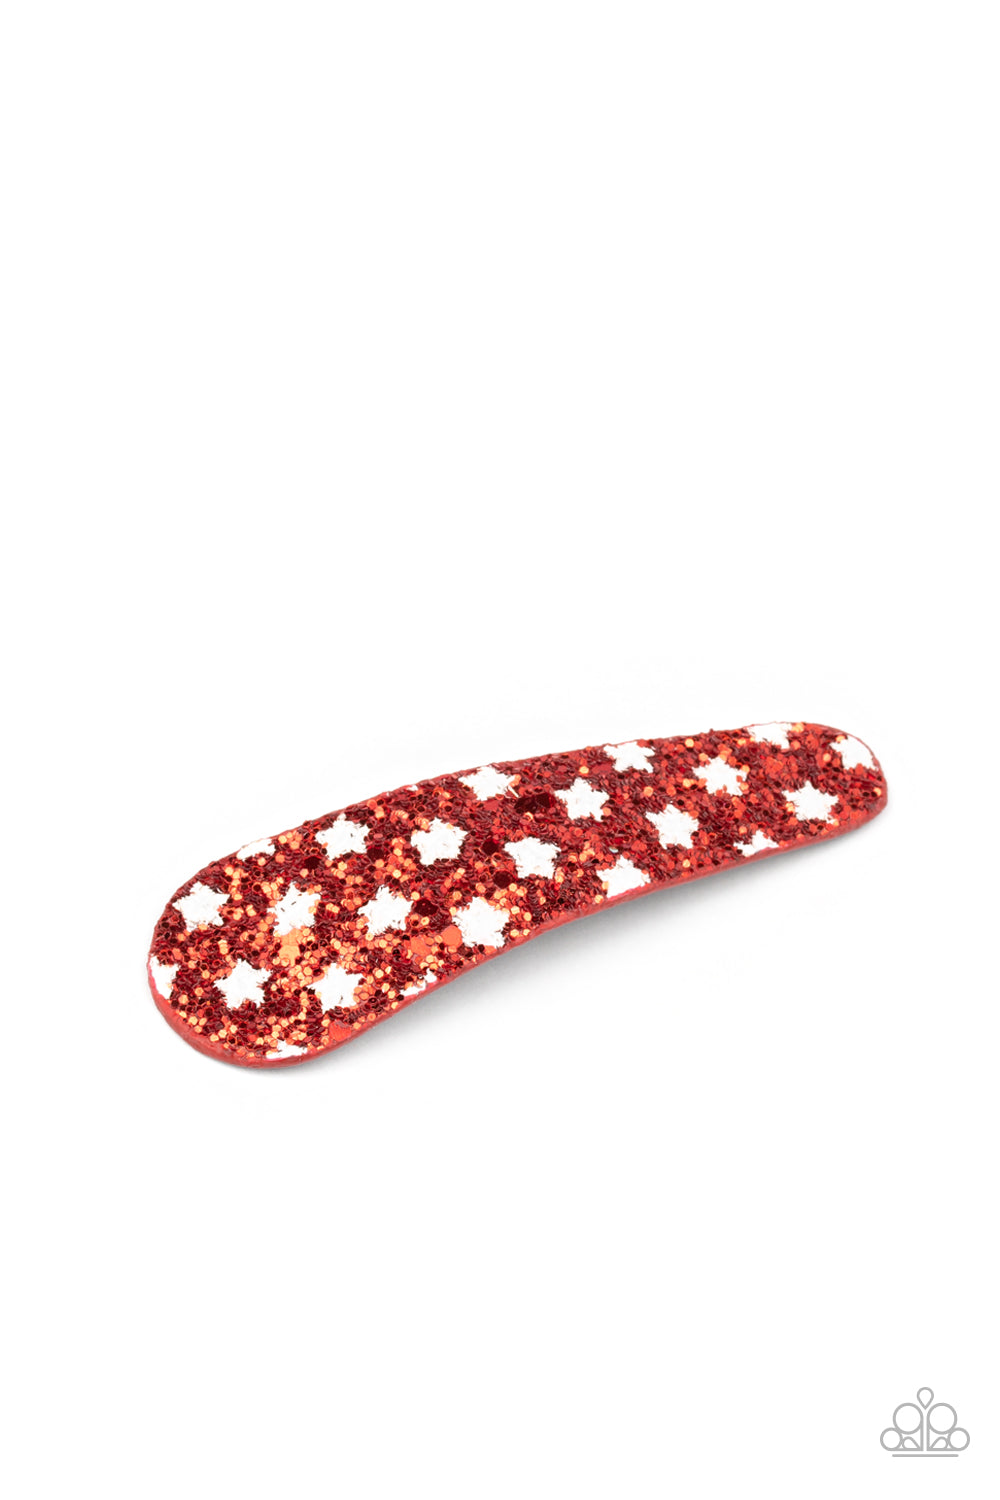 All American Girl - Red Hair Clip